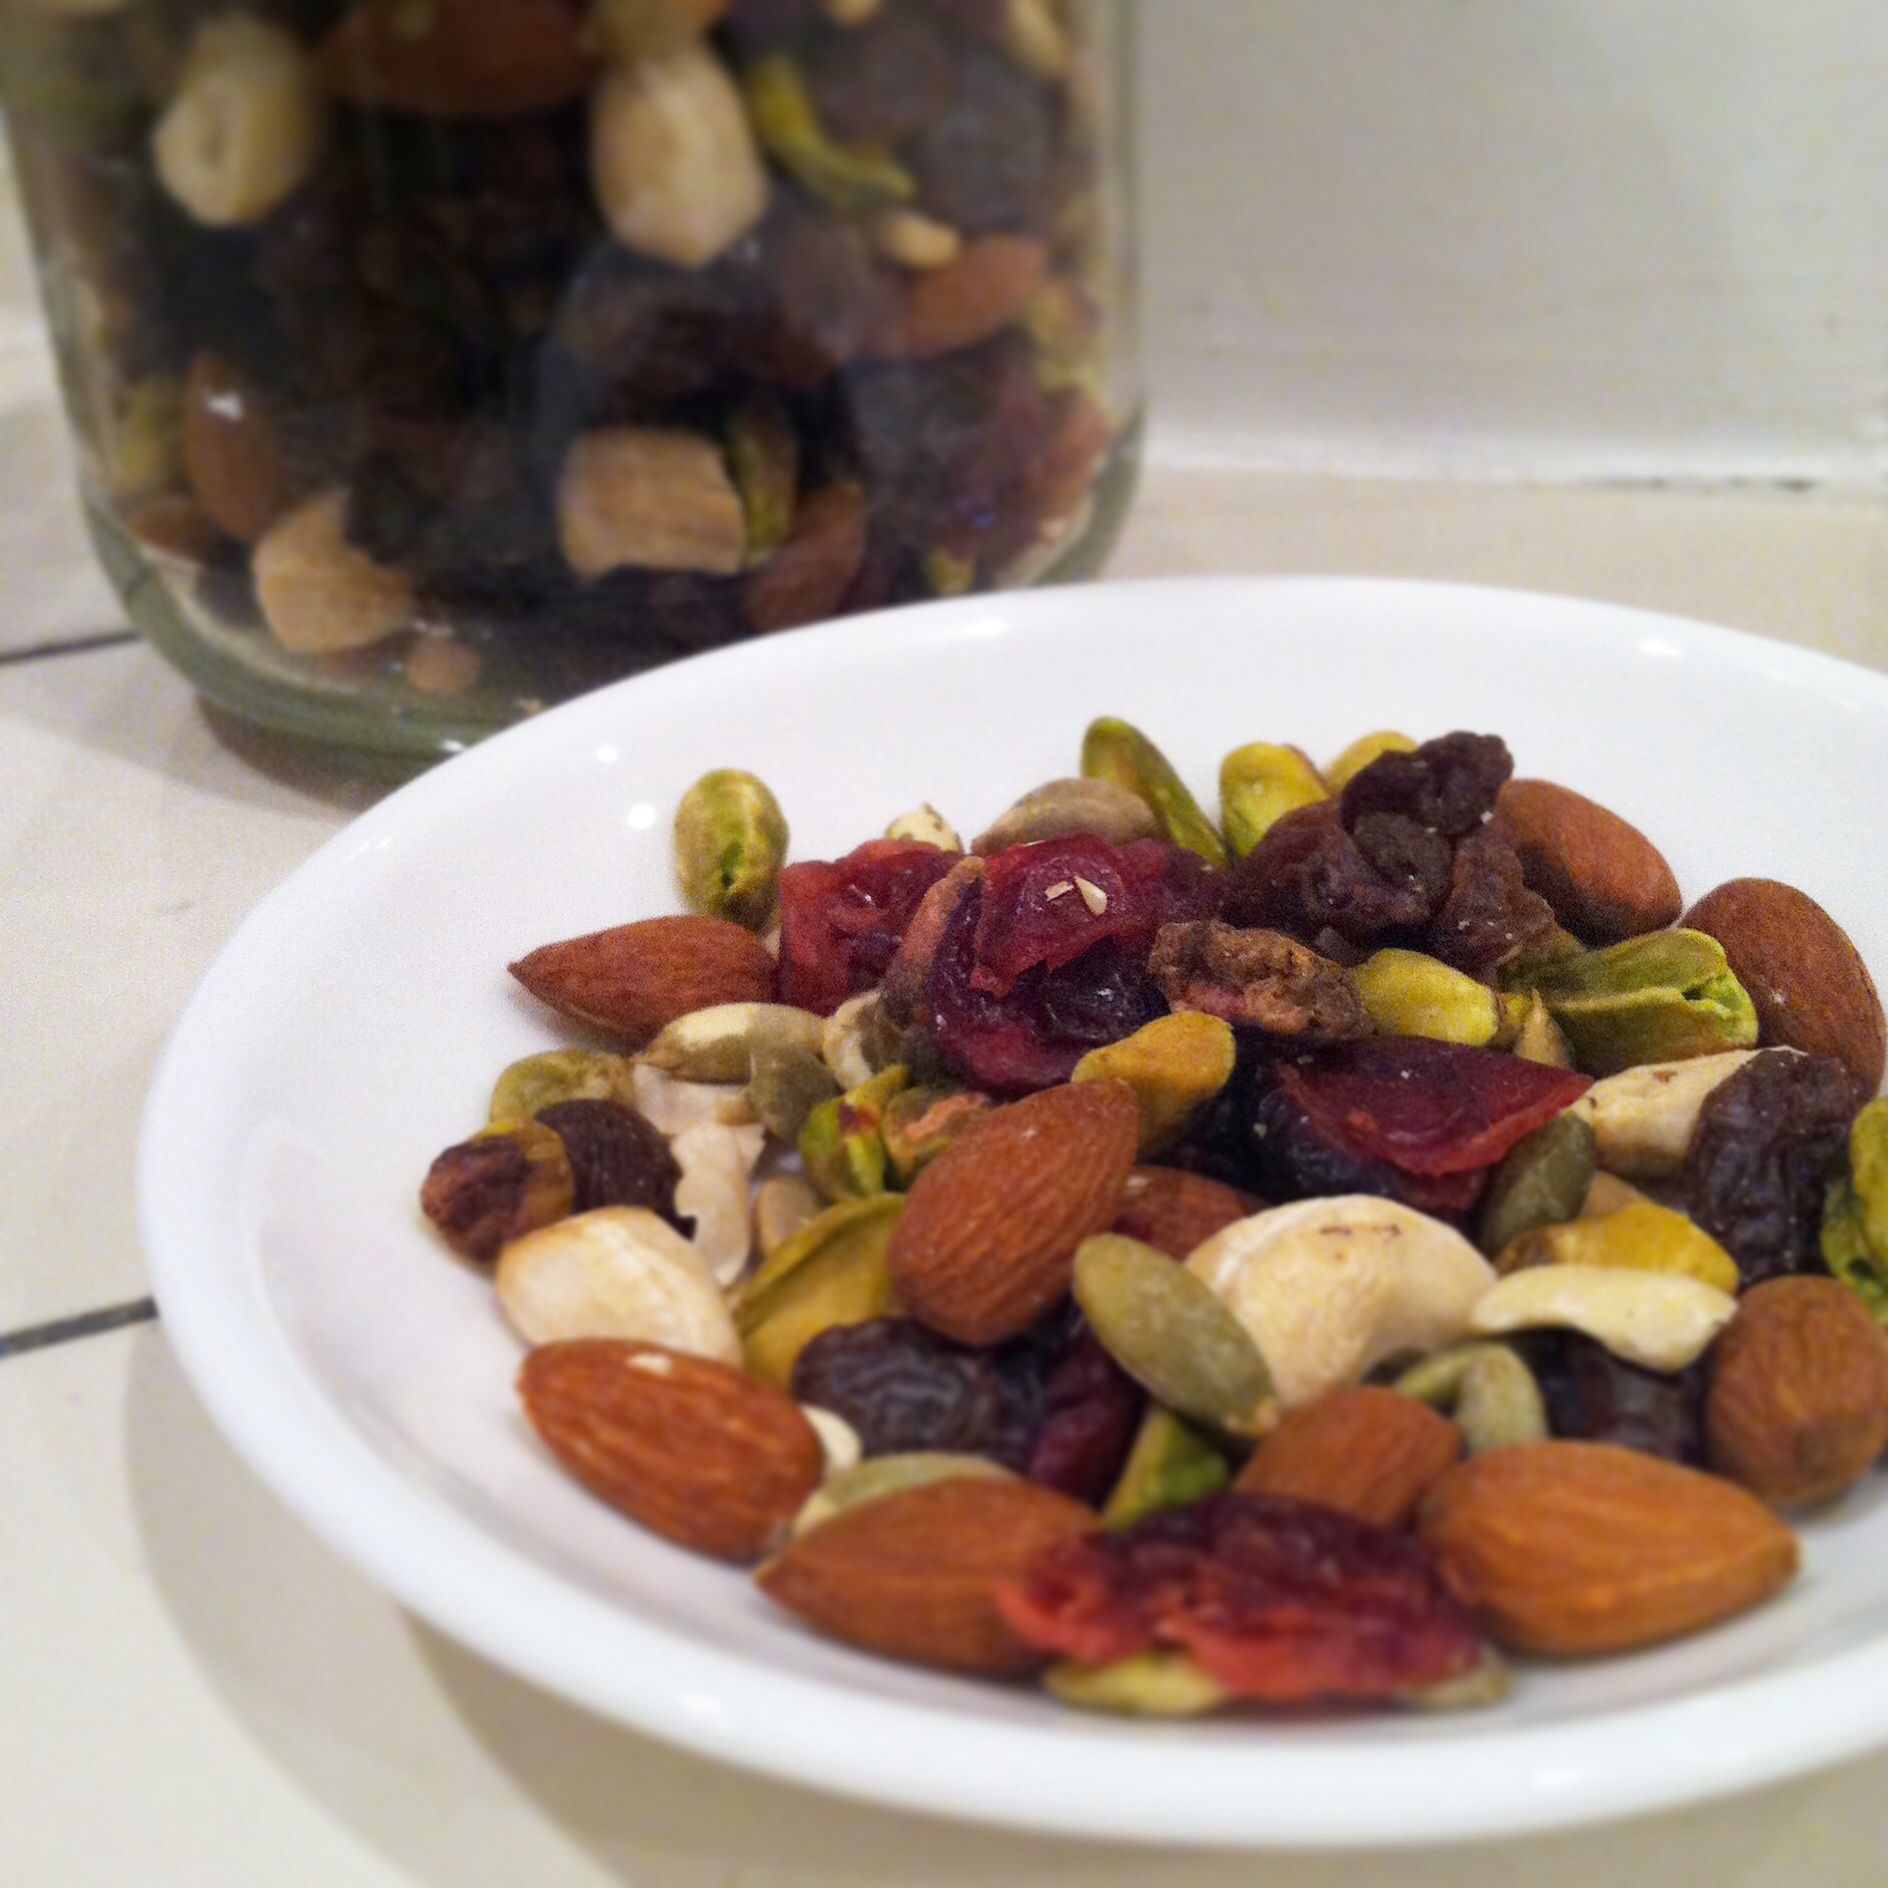 Make Your Own Trail Mix